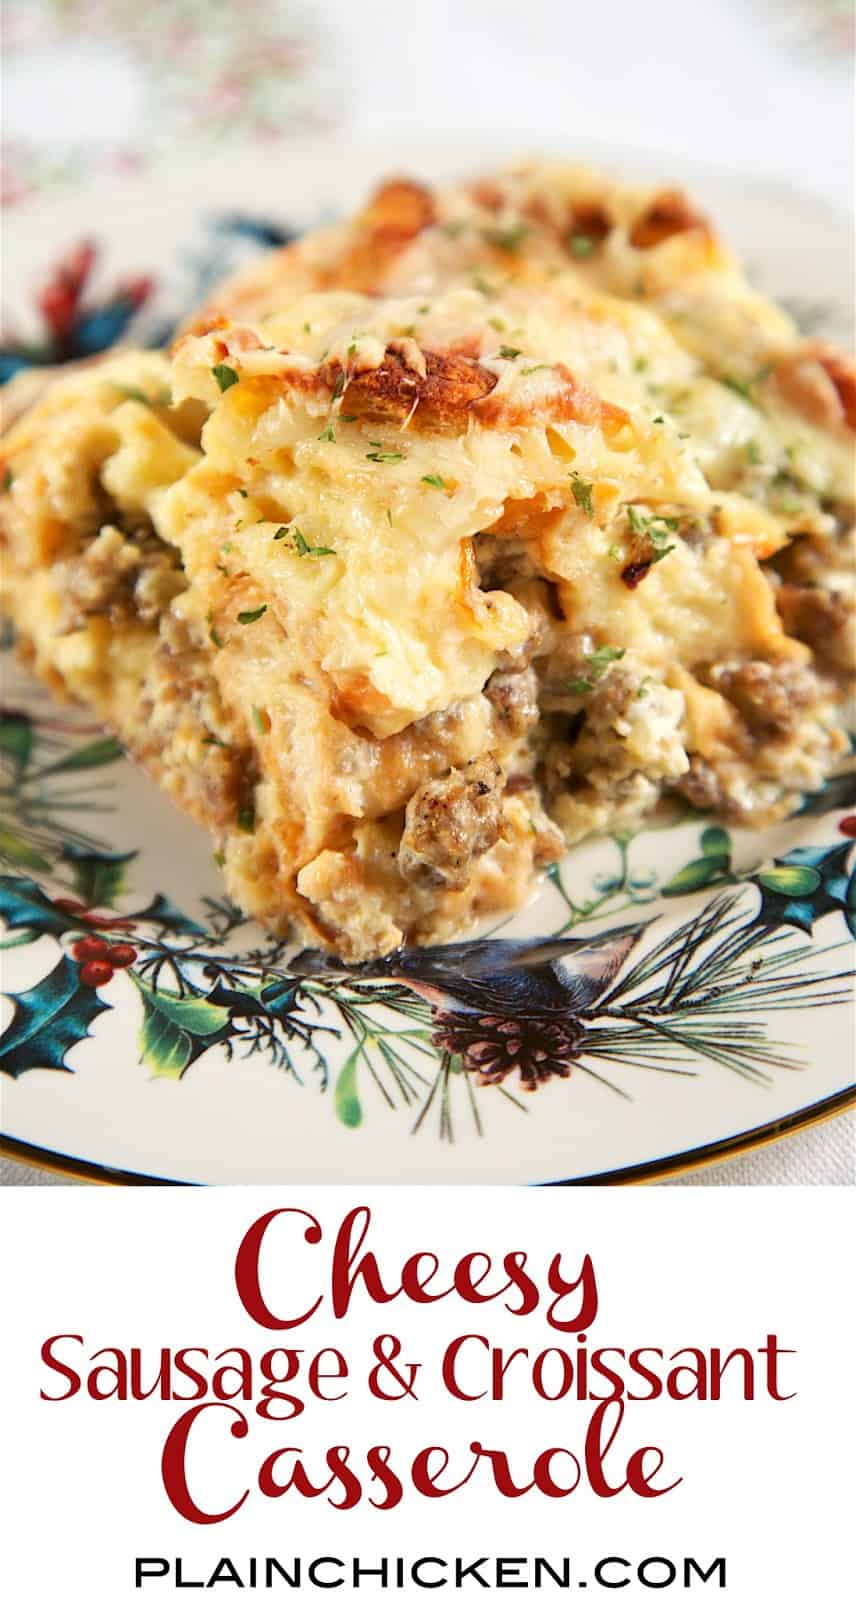 Overnight Cheesy Sausage and Croissant Casserole - buttery croissants, sausage, eggs, heavy cream and gruyere cheese - make and refrigerate overnight. SO delicious!! Great casserole recipe for Christmas morning!